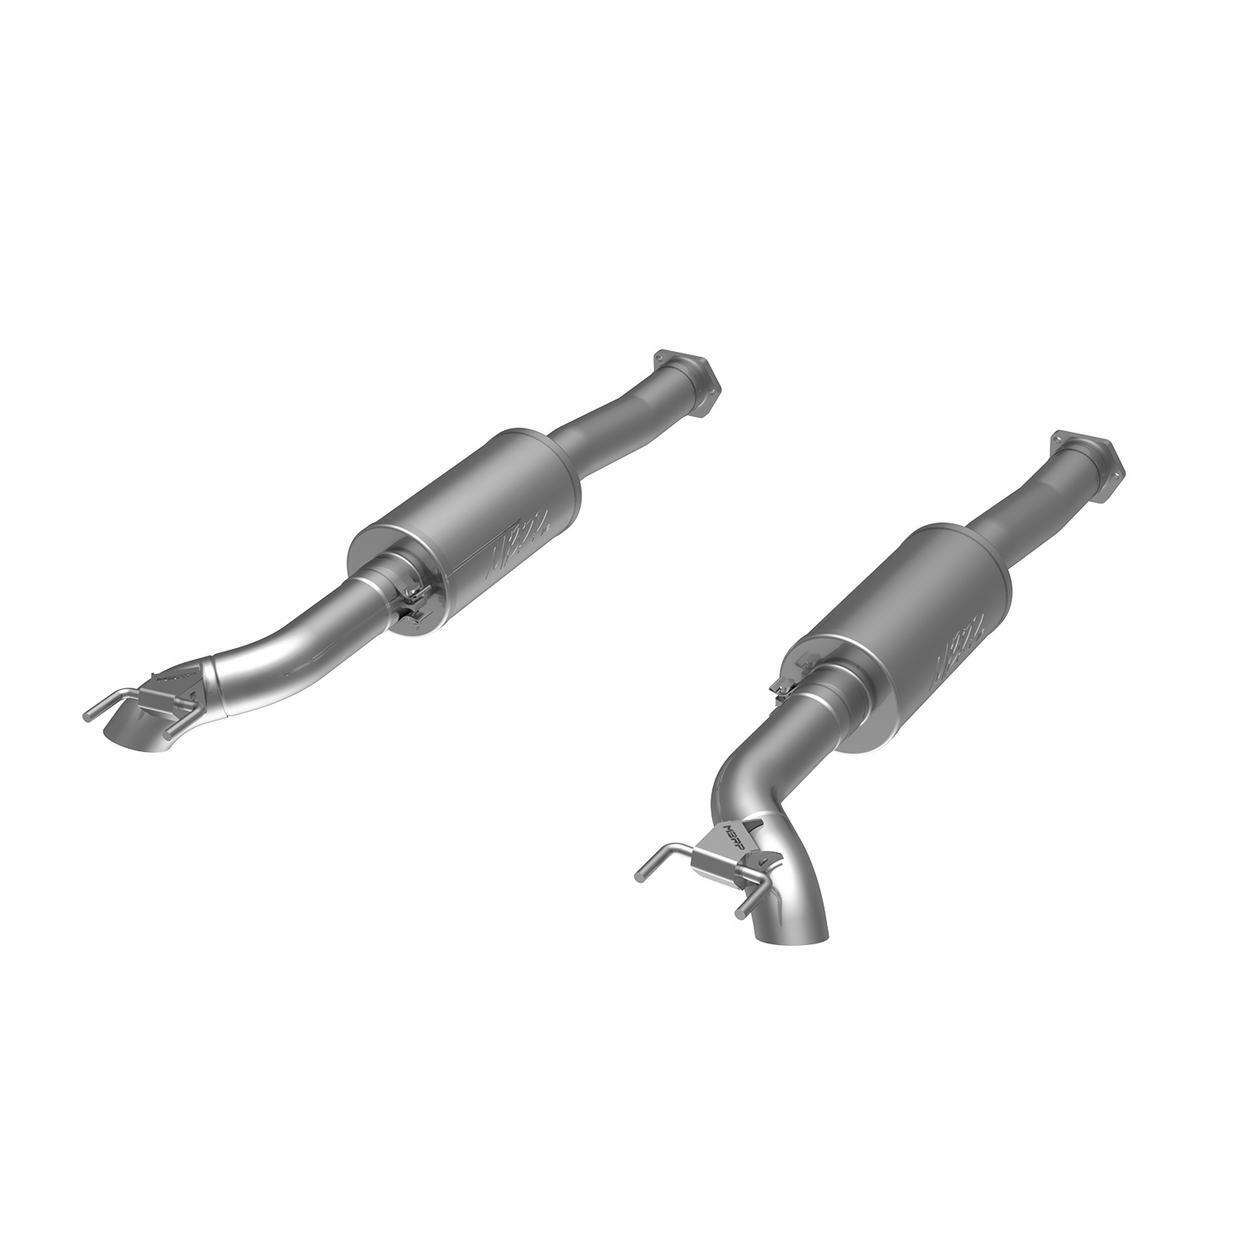 Exhaust System Kit for 2013-2016 Mercedes G63 AMG